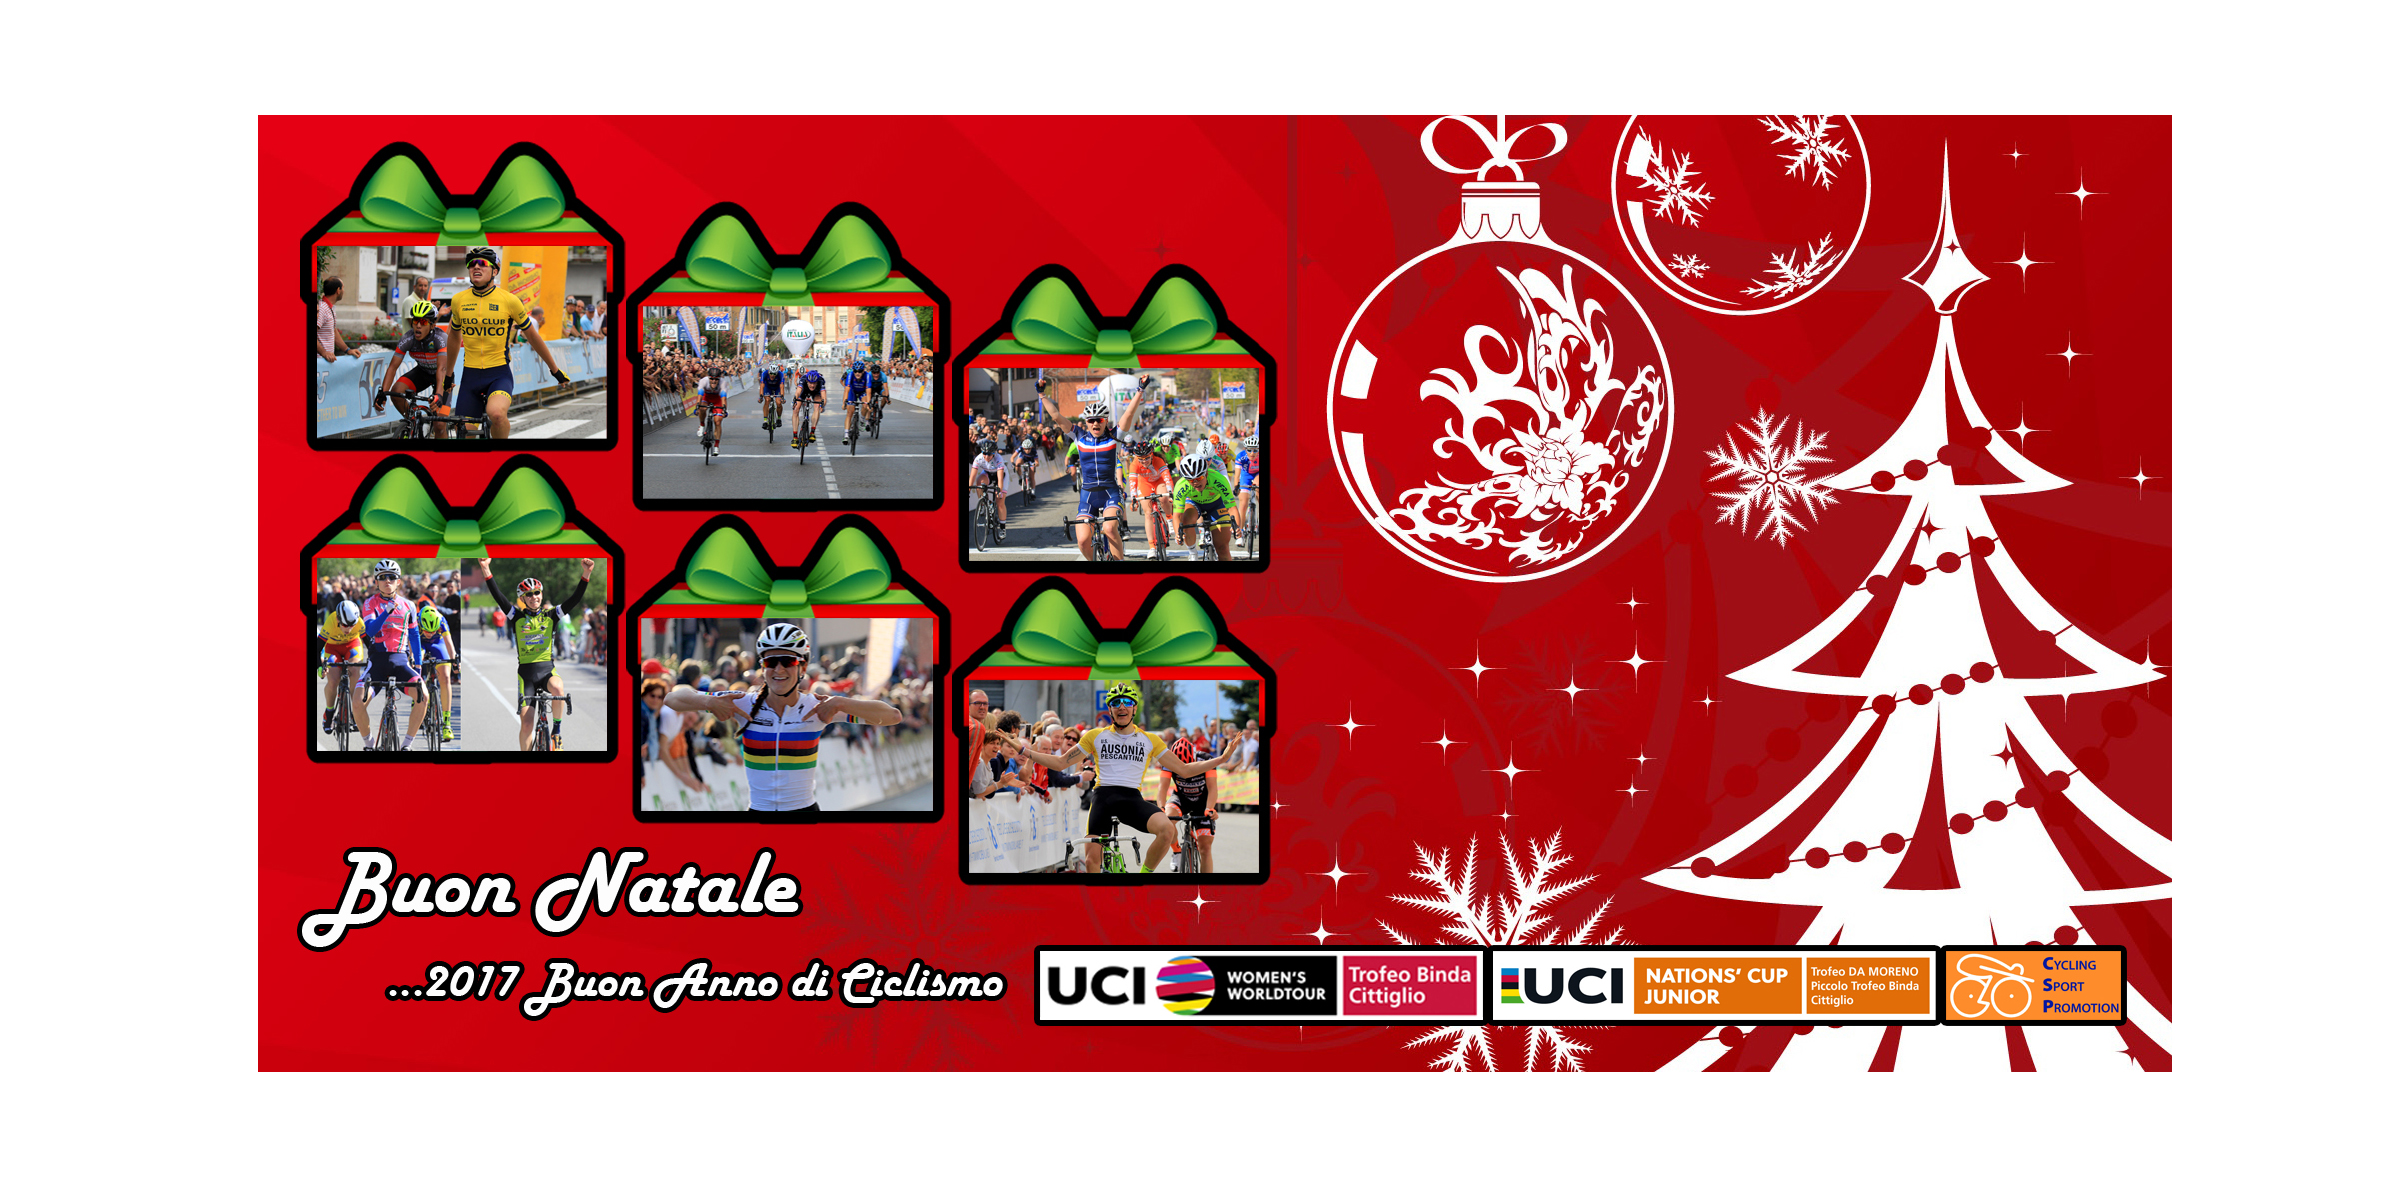 <!--:it-->Buon Natale e Felice Anno Nuovo dalla Cycling Sport Promotion<!--:--><!--:en-->Merry Christmas and a Happy New Year <!--:-->